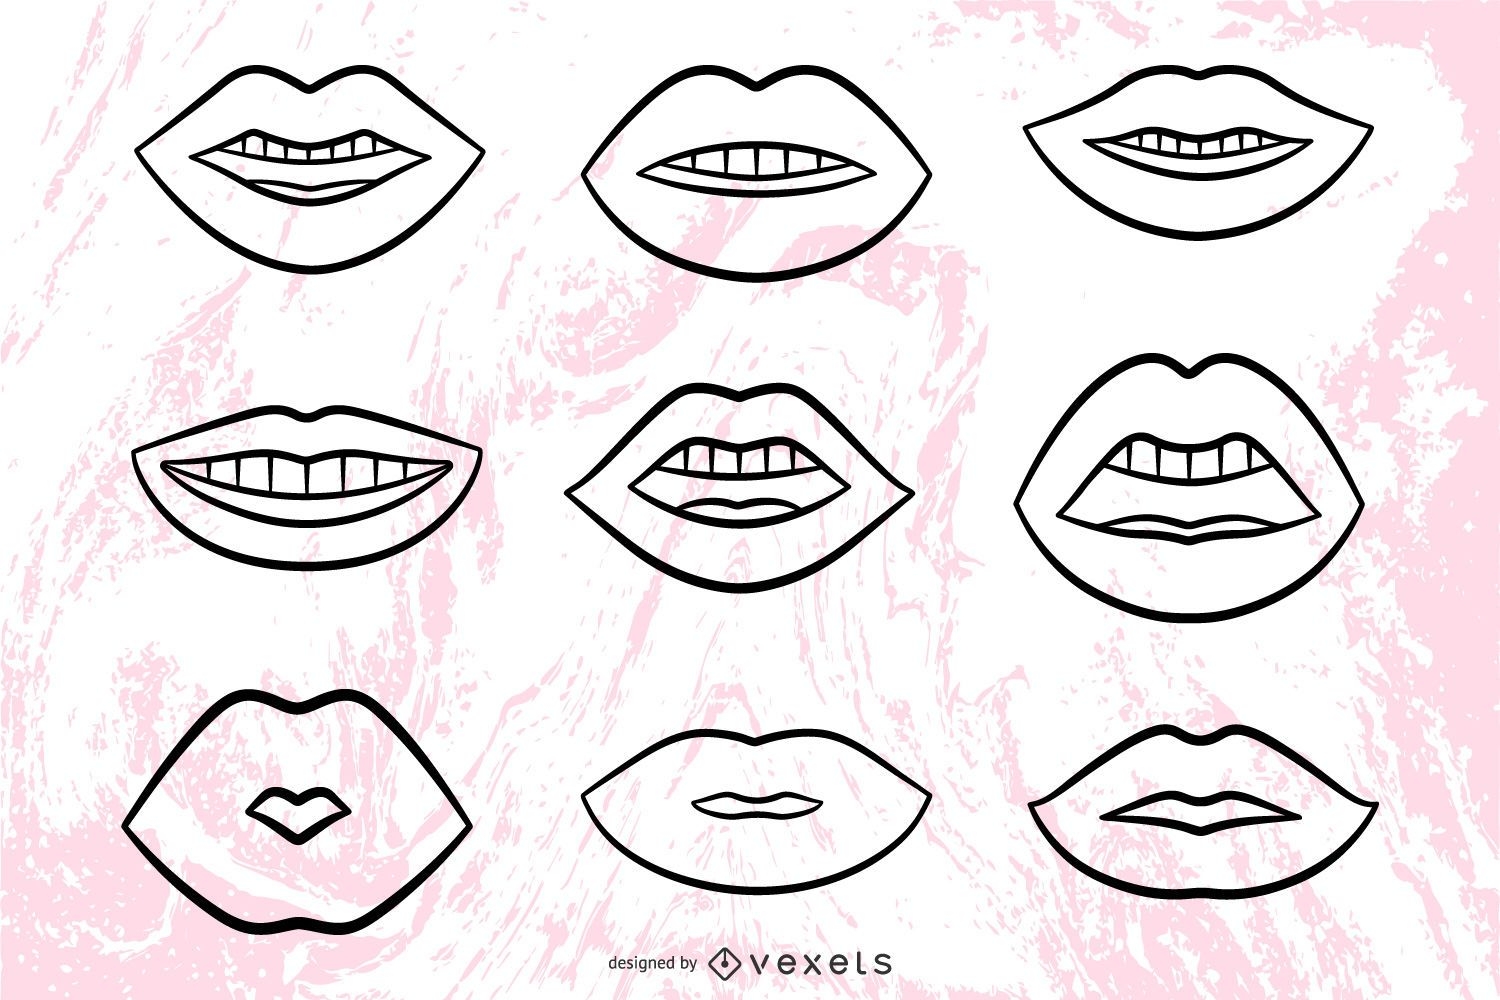 1 hour of lip studies Critiques very welcome  rlearnart